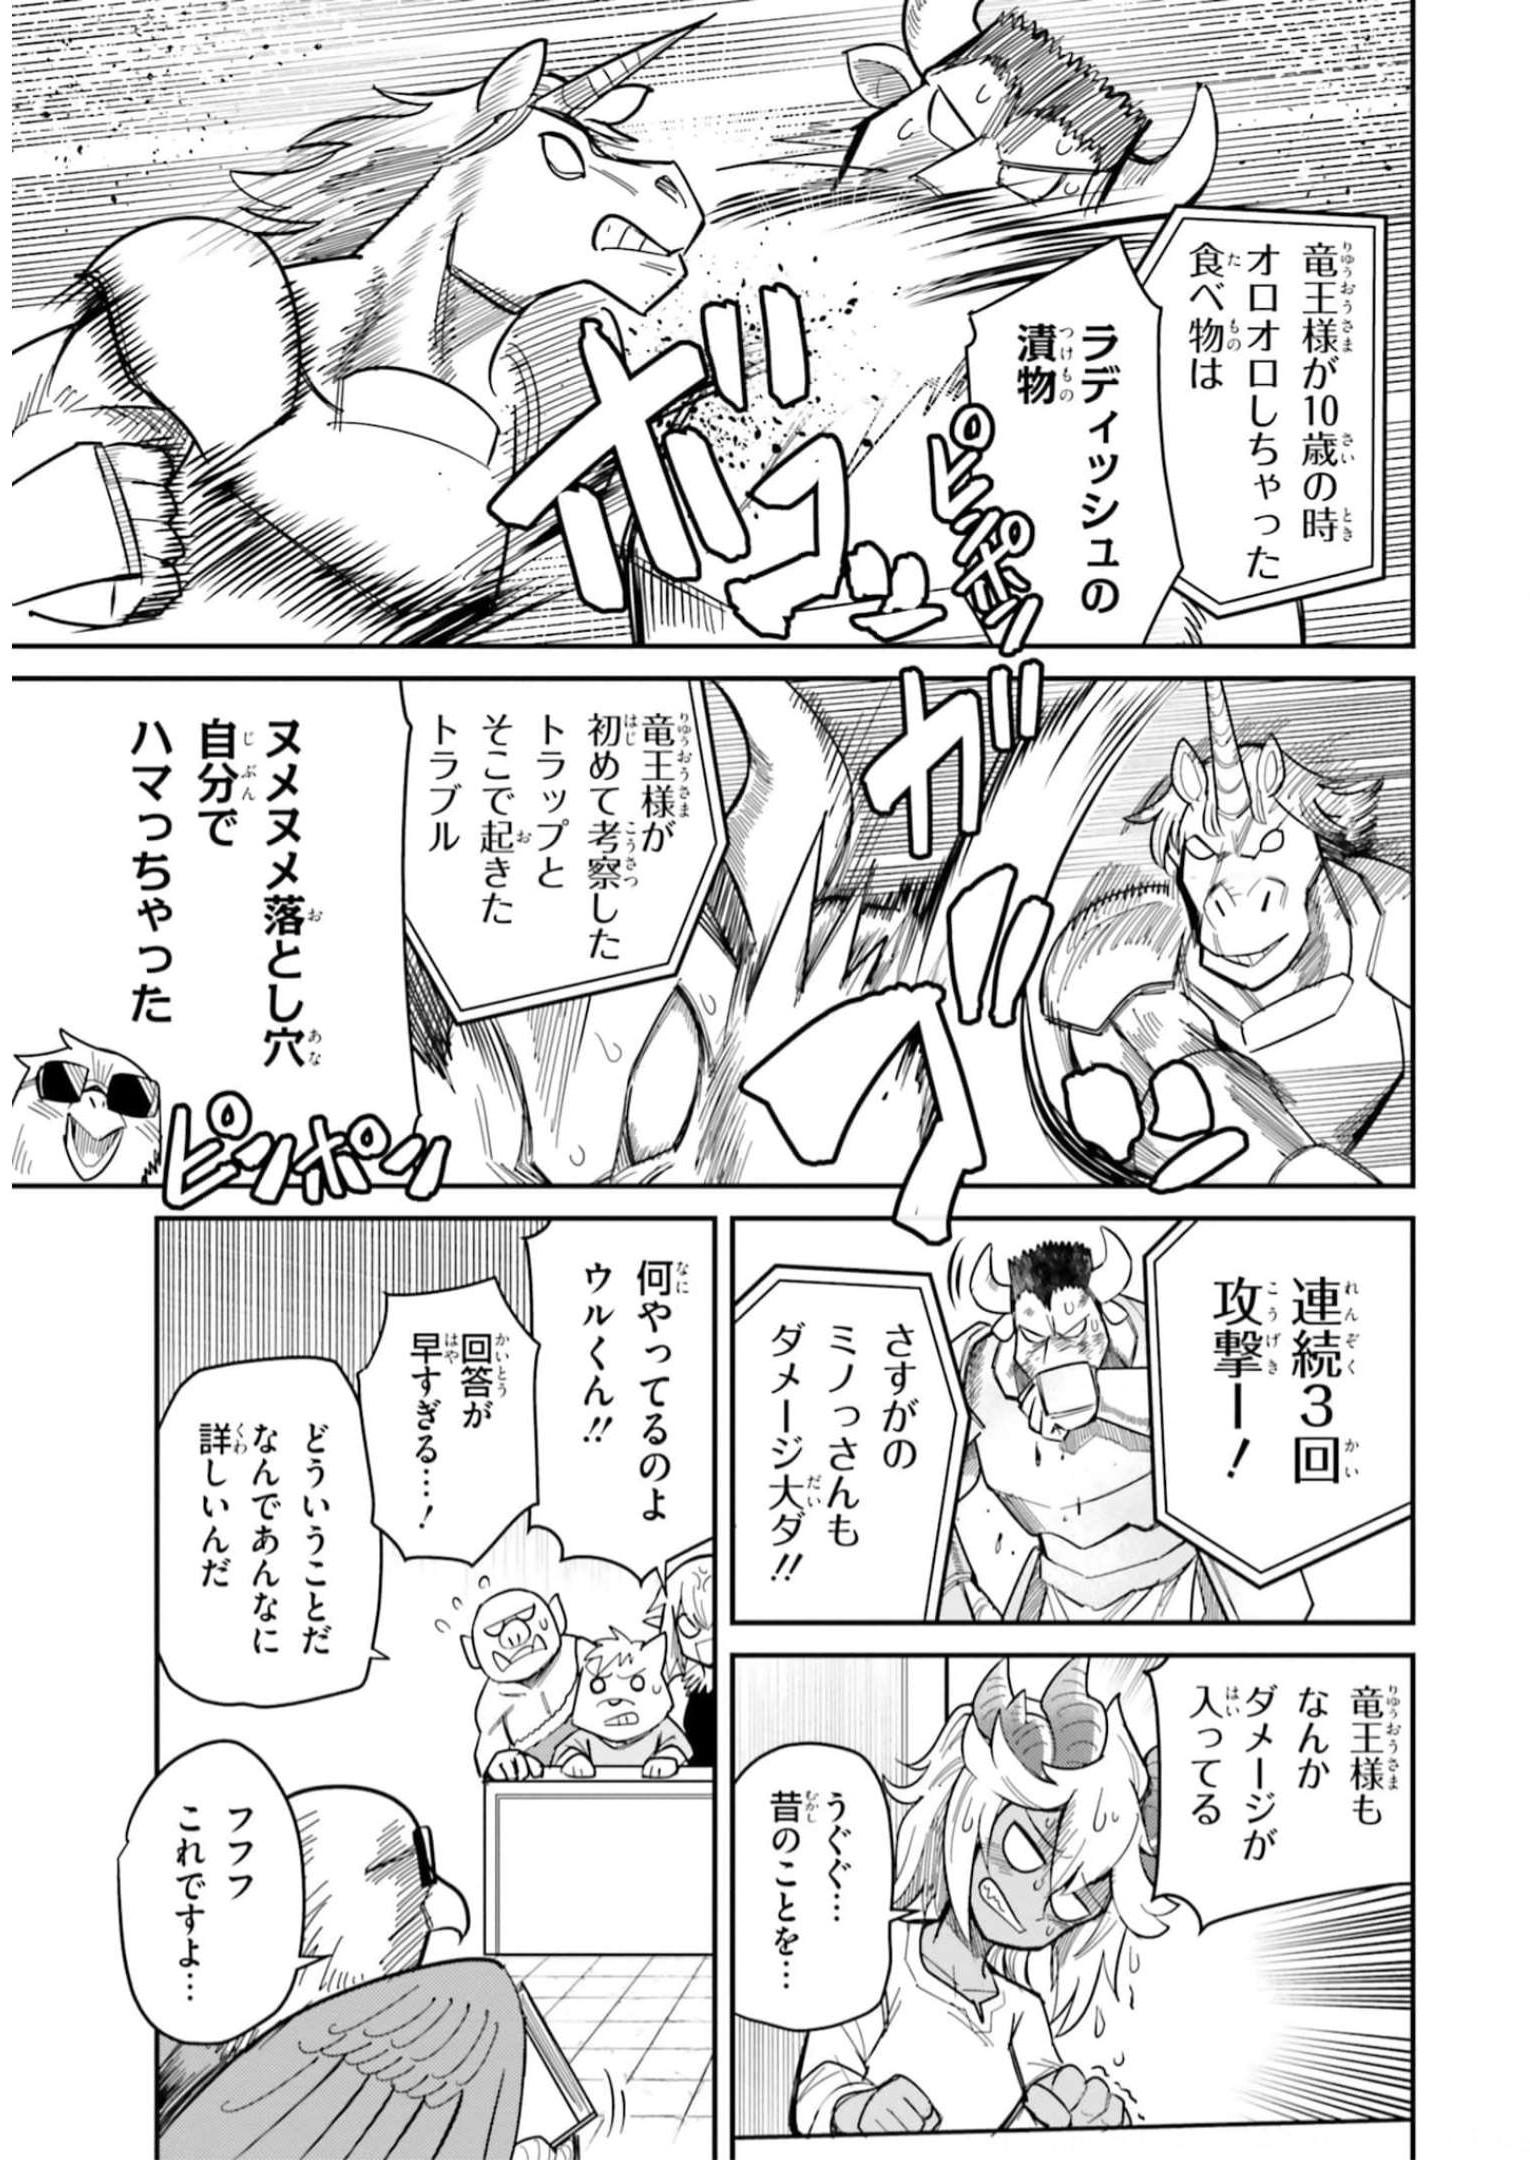 Dungeon Friends Forever Dungeon's Childhood Friend ダンジョンの幼なじみ 第21話 - Page 6